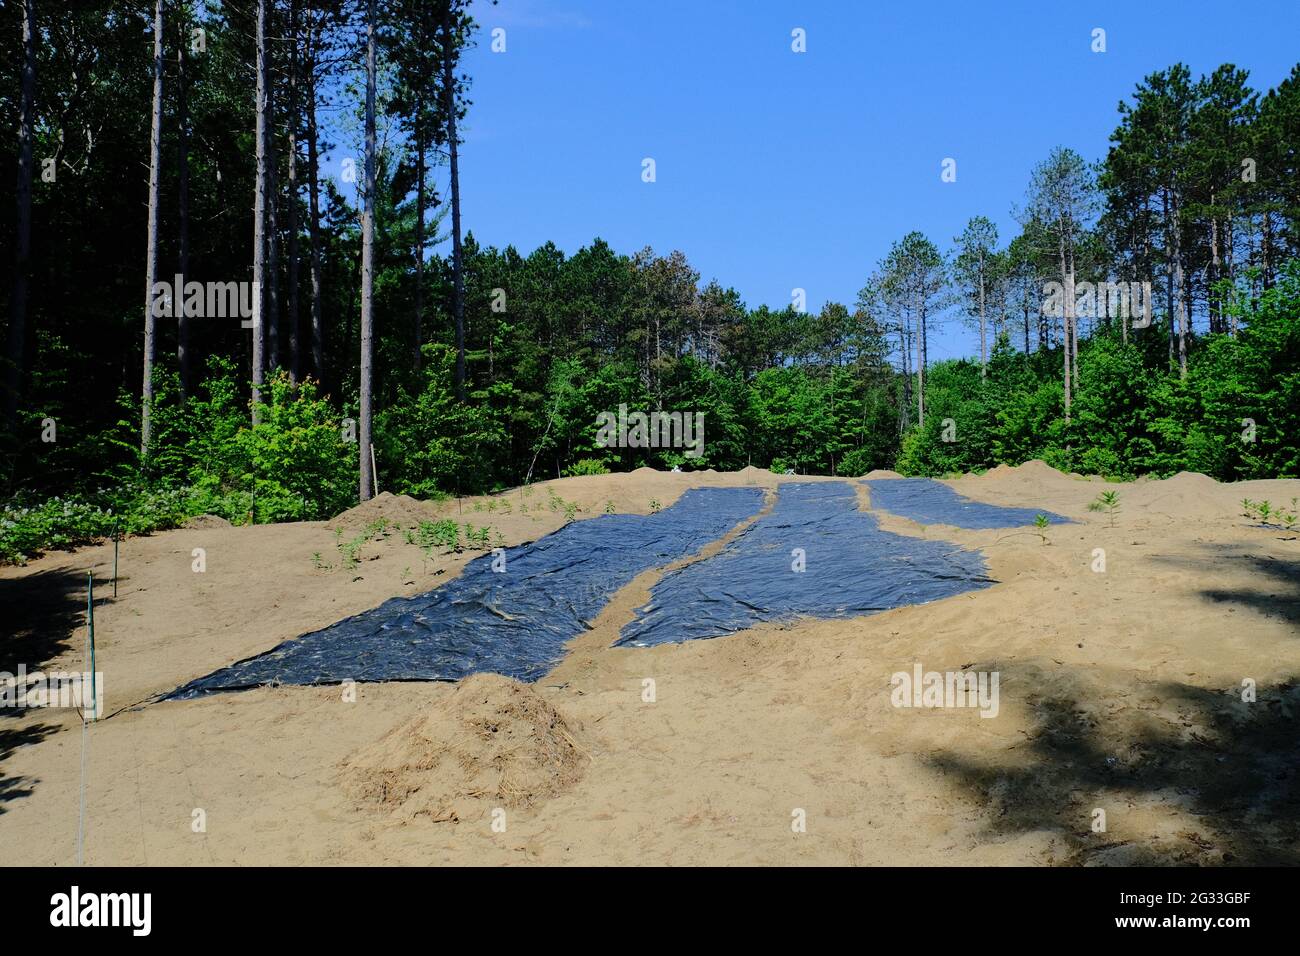 Black plastic covers the sand at Pinhey Sand Dunes biodiversity restoration project in Ottawa, Ontario, Canada. Stock Photo